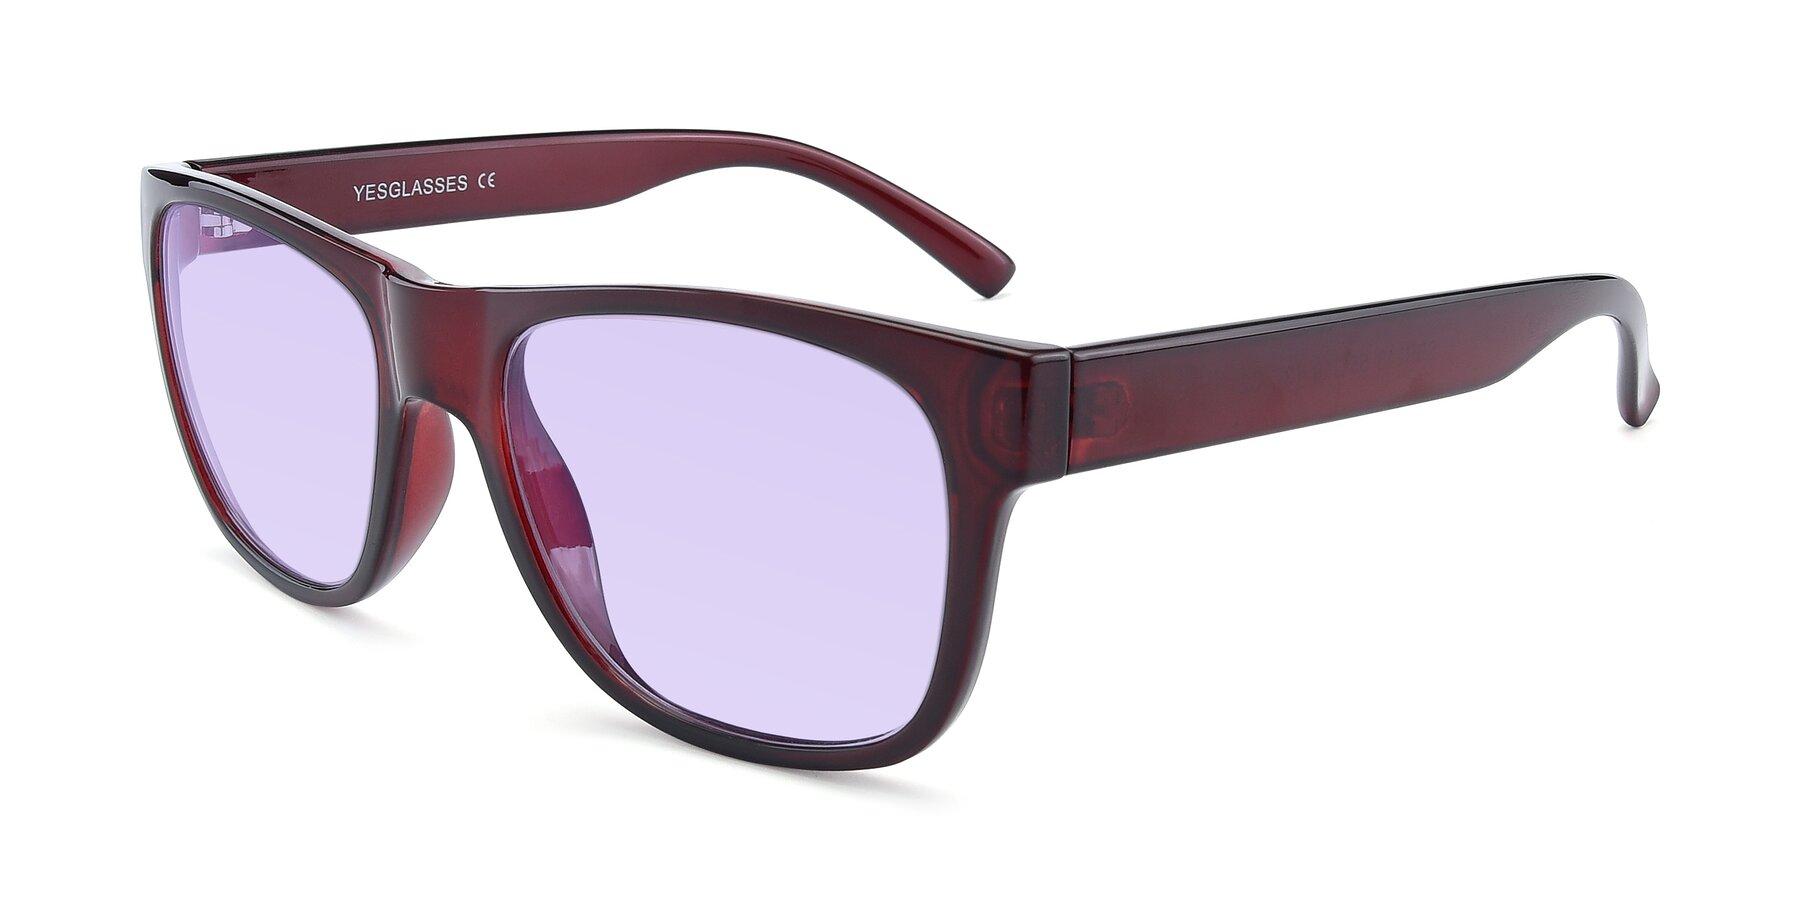 Angle of SSR213 in Wine with Light Purple Tinted Lenses